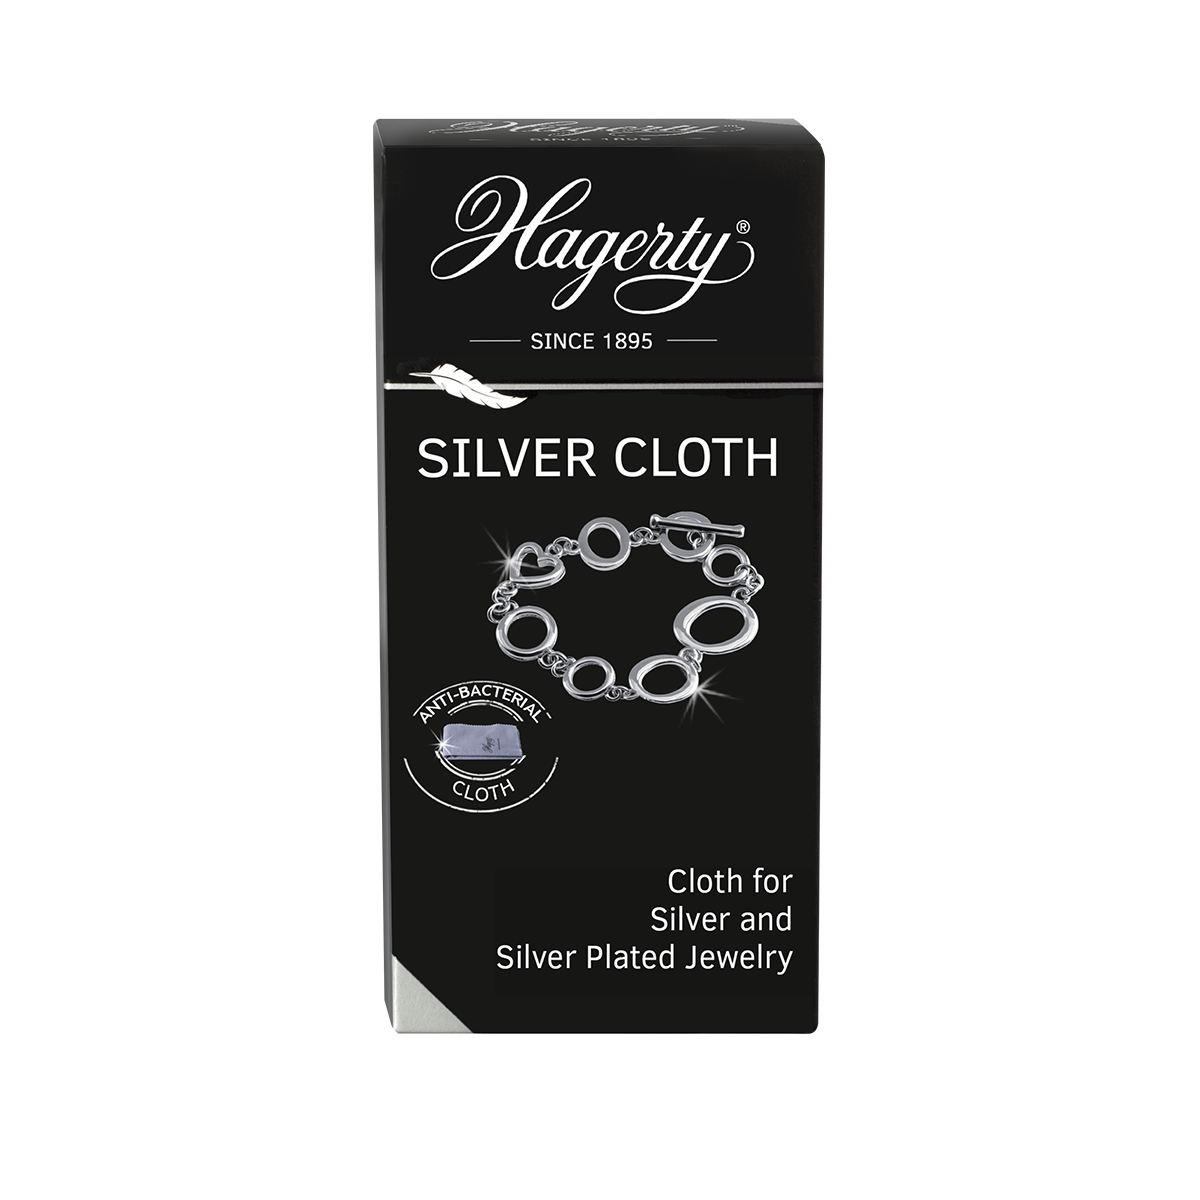 https://hagerty.world/en/1006/silver-cloth-cleaning-cloth-for-silver-jewellery.jpg